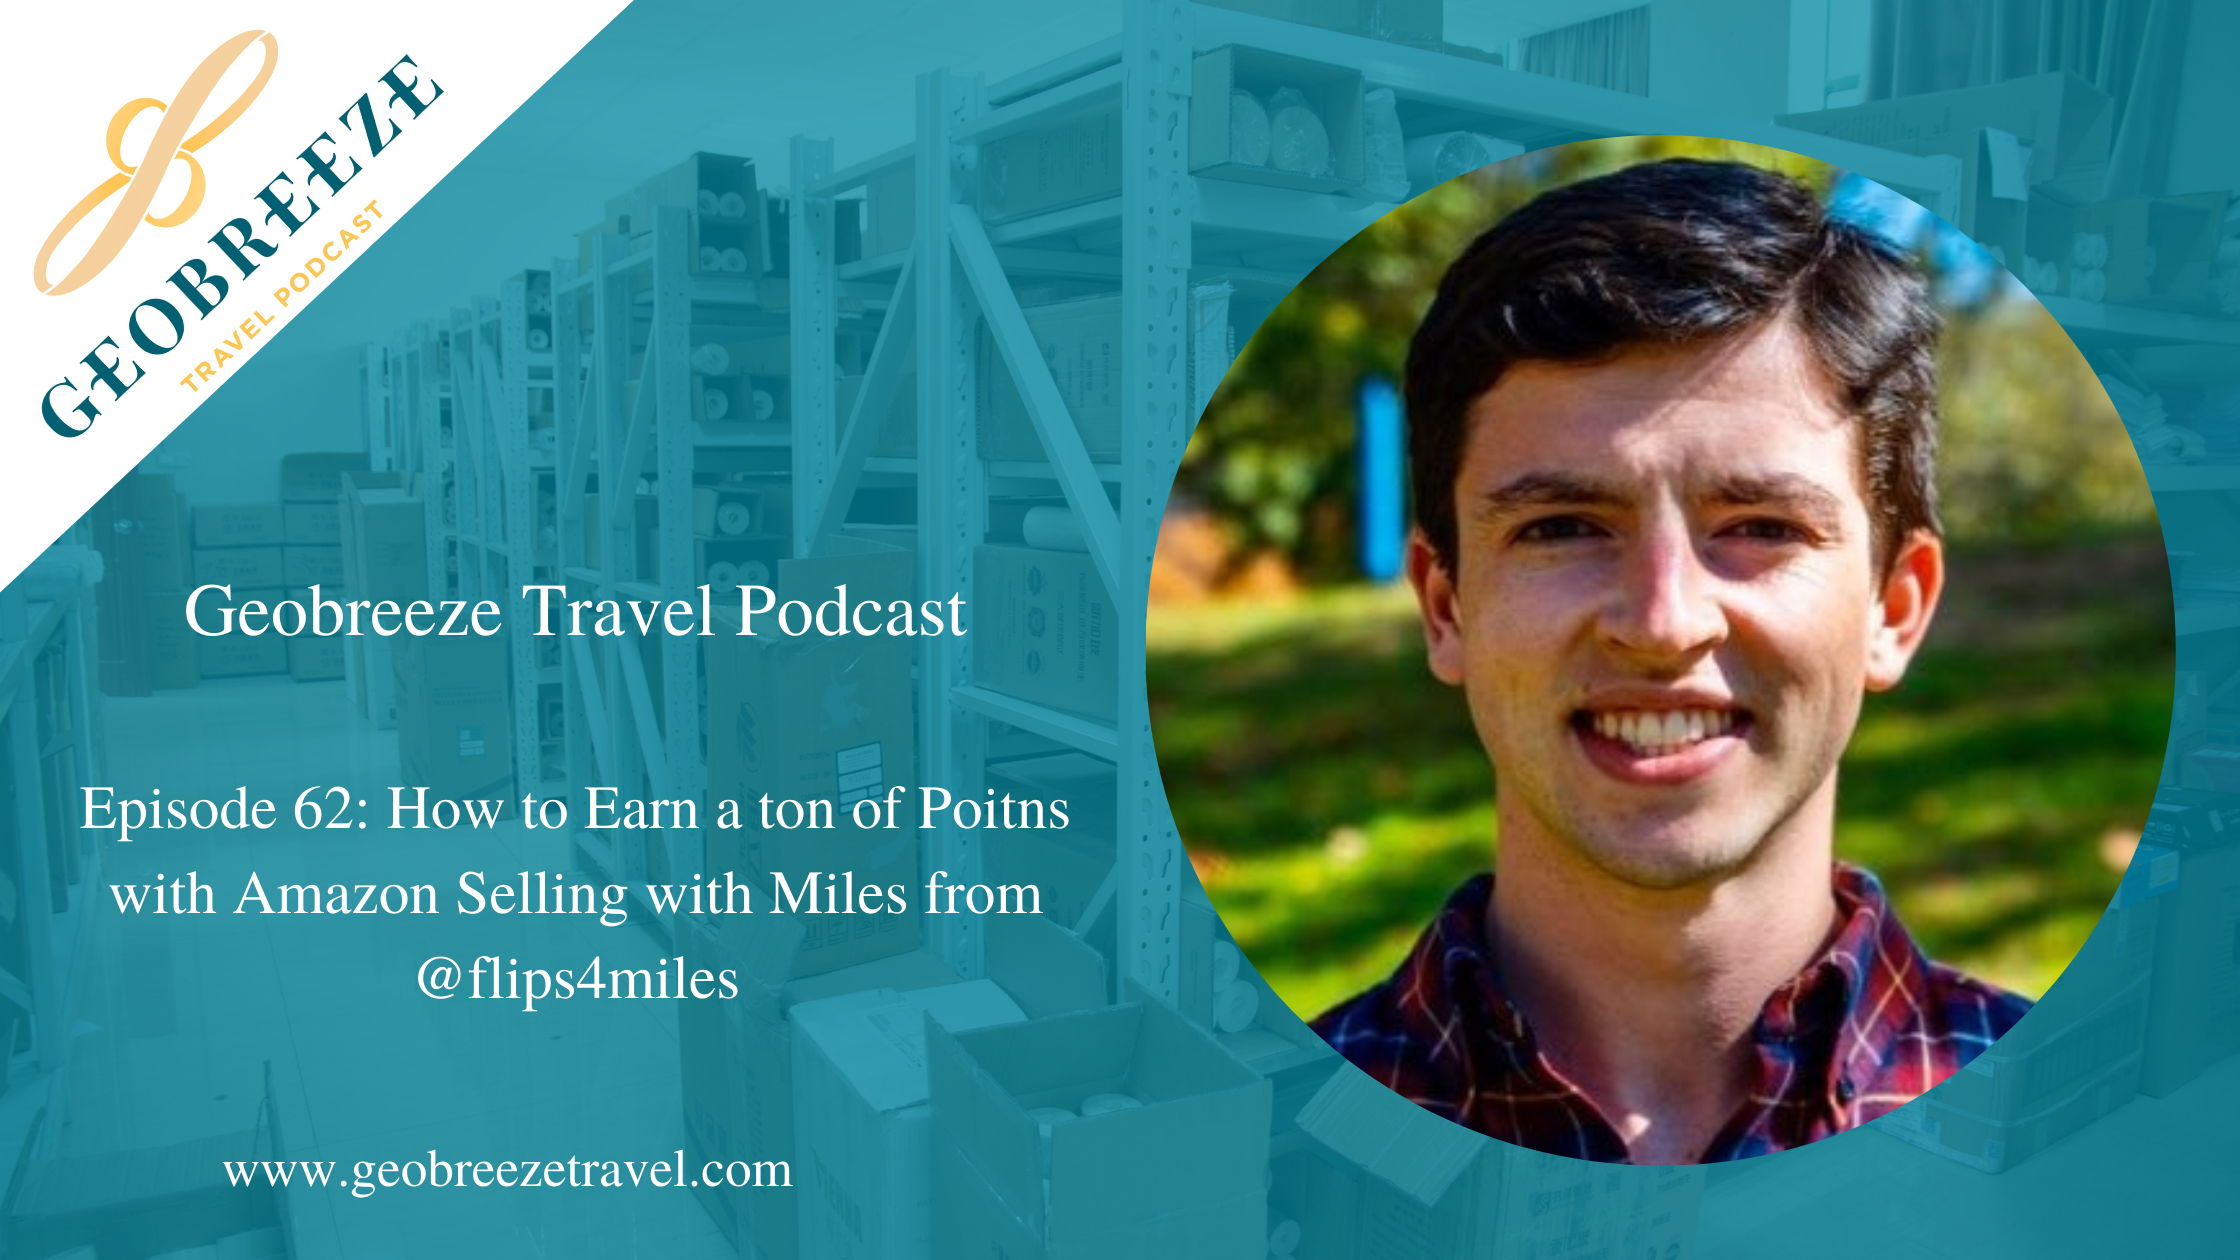 Episode 62: How to Earn a Ton of Points with Amazon Selling with Miles from @flips4Miles